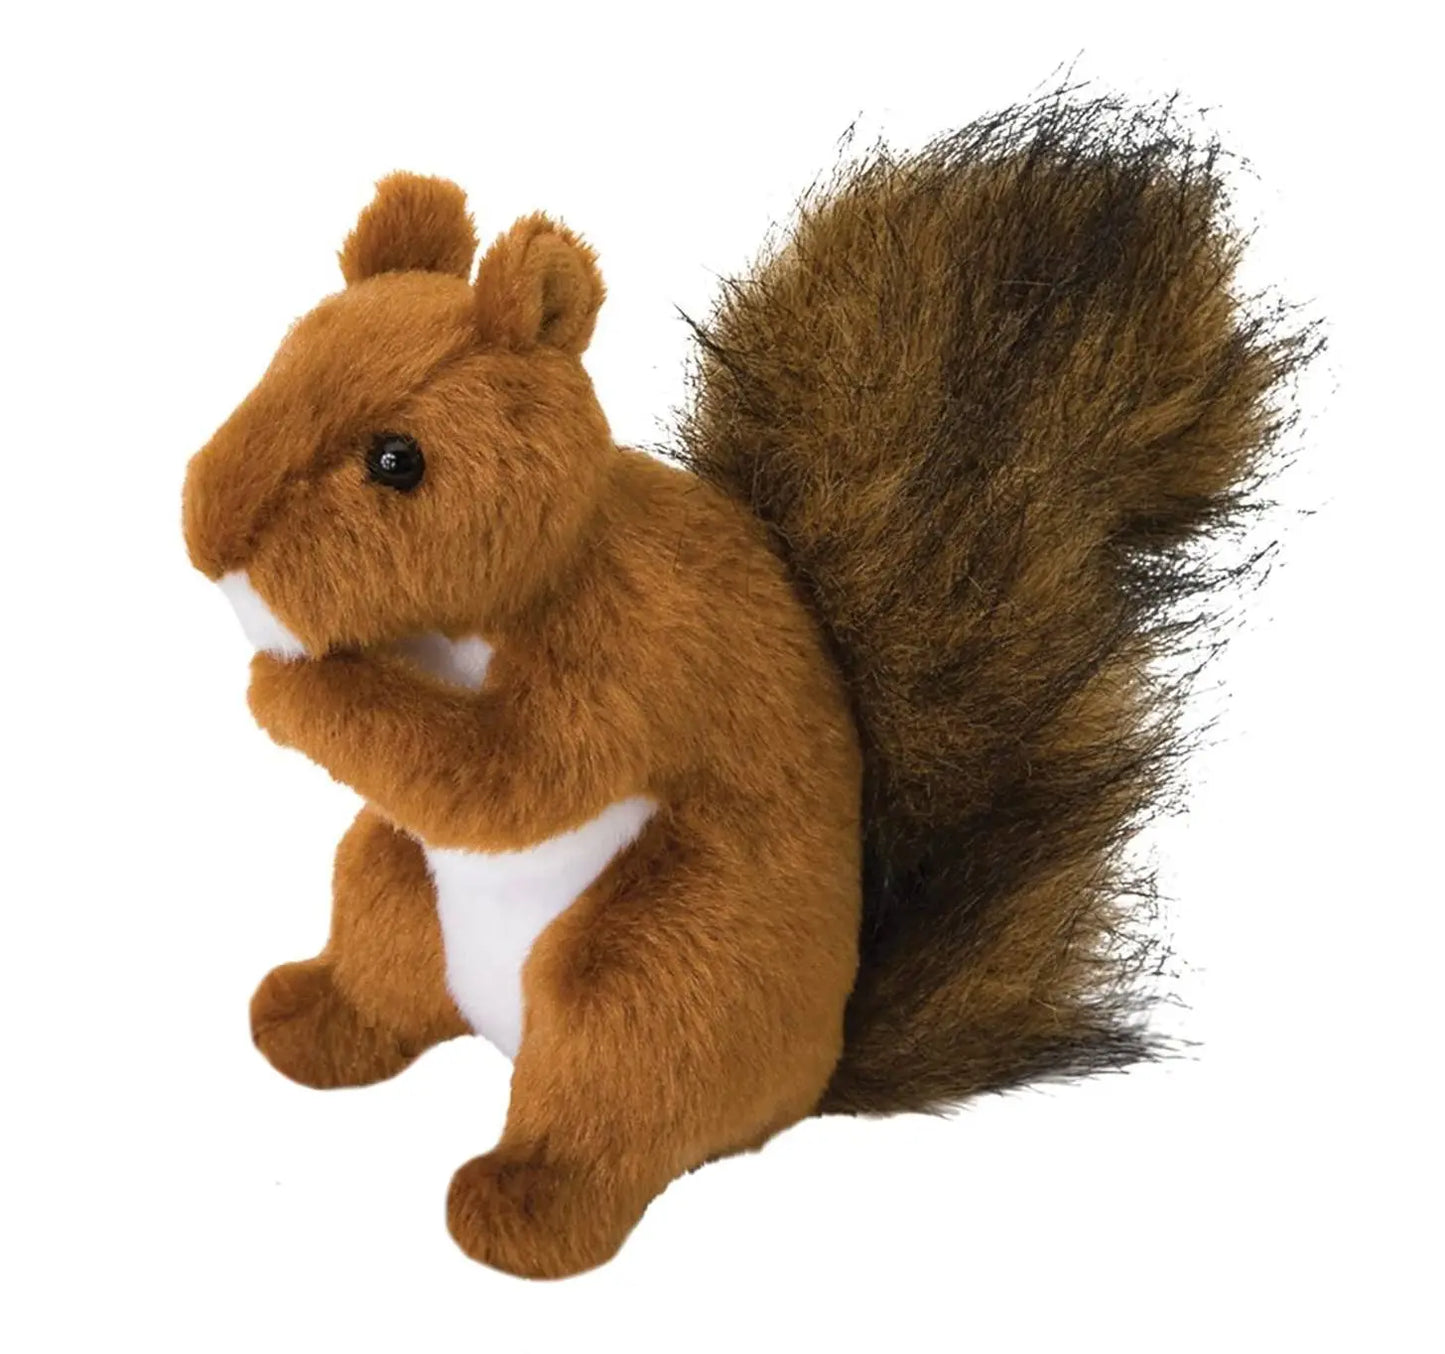 Roadie the Red Squirrel